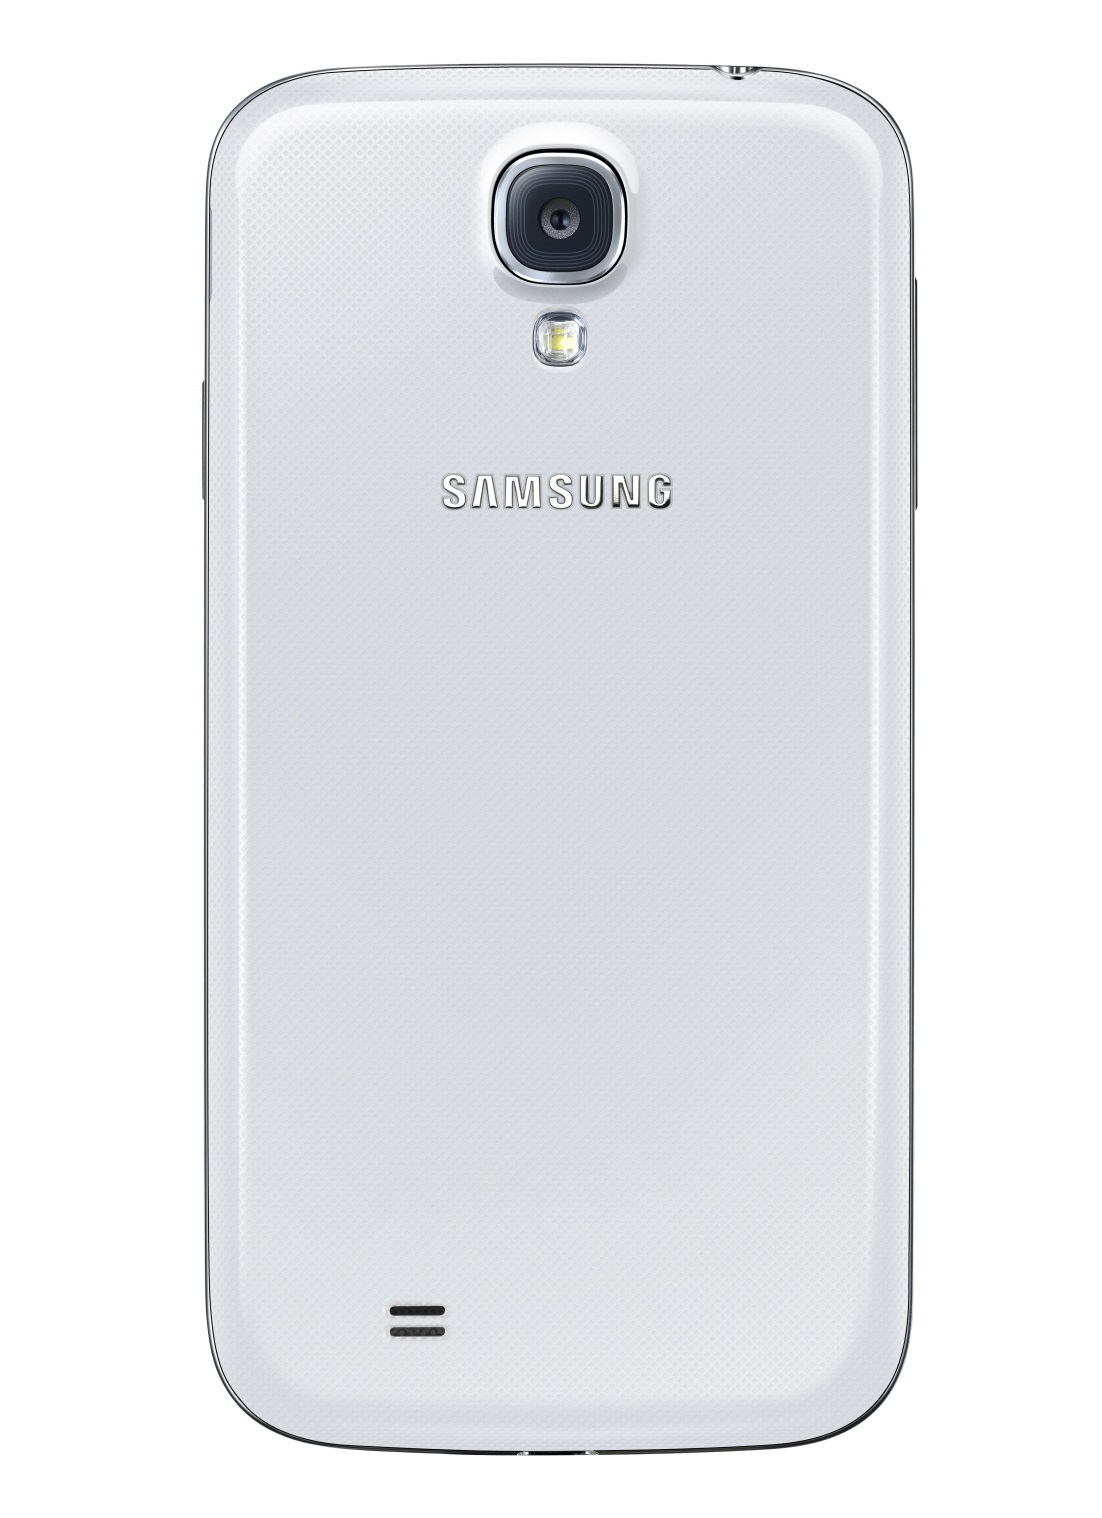 Samsung I9500 Galaxy S4 Full Phone Specifications, Comparison